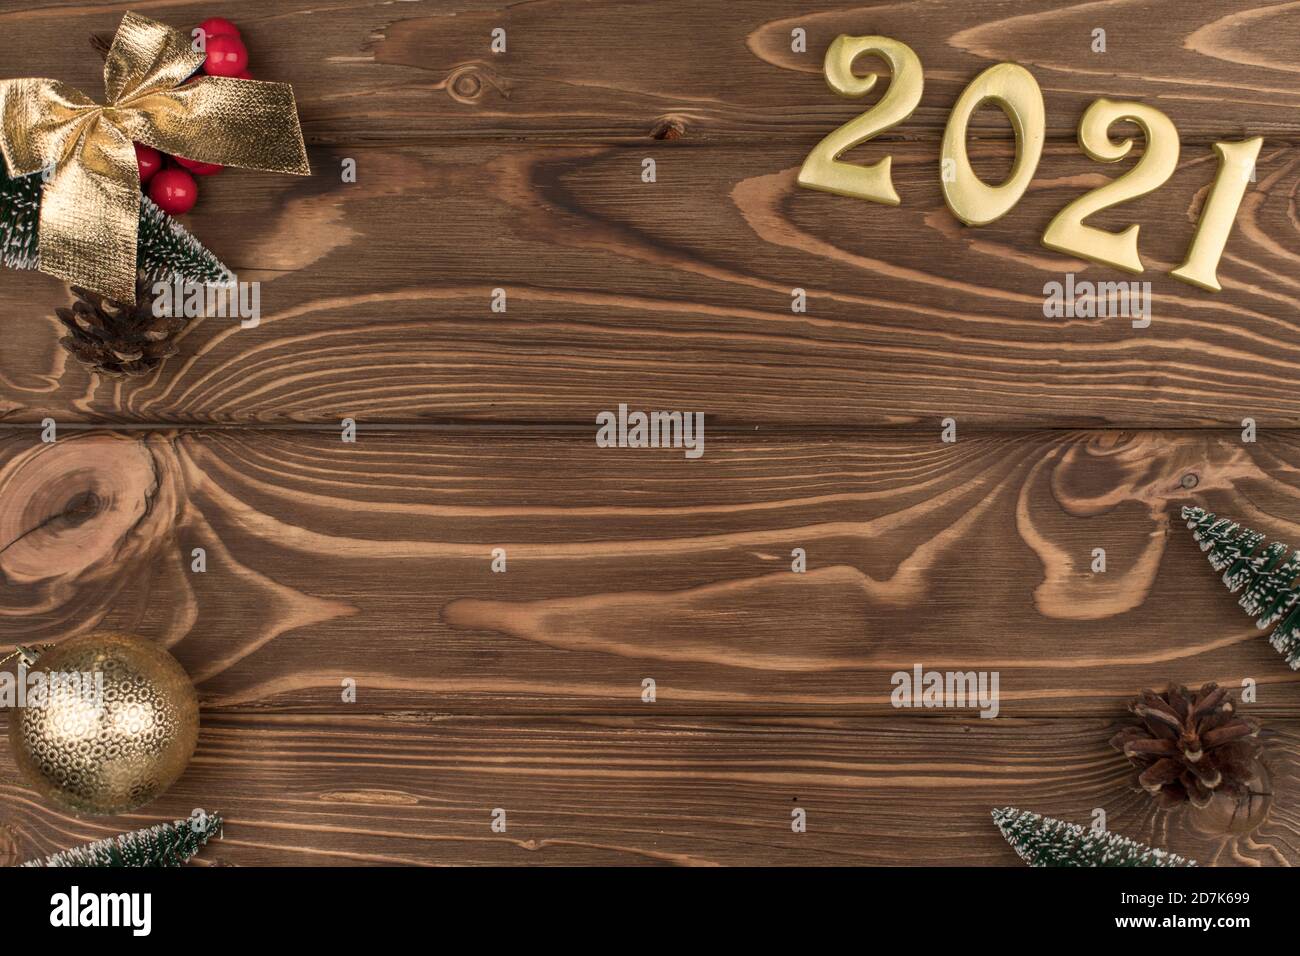 new year 2021 Golden numbers on wooden background with new year decor, Happy Christmas, flatly, copy spase Stock Photo